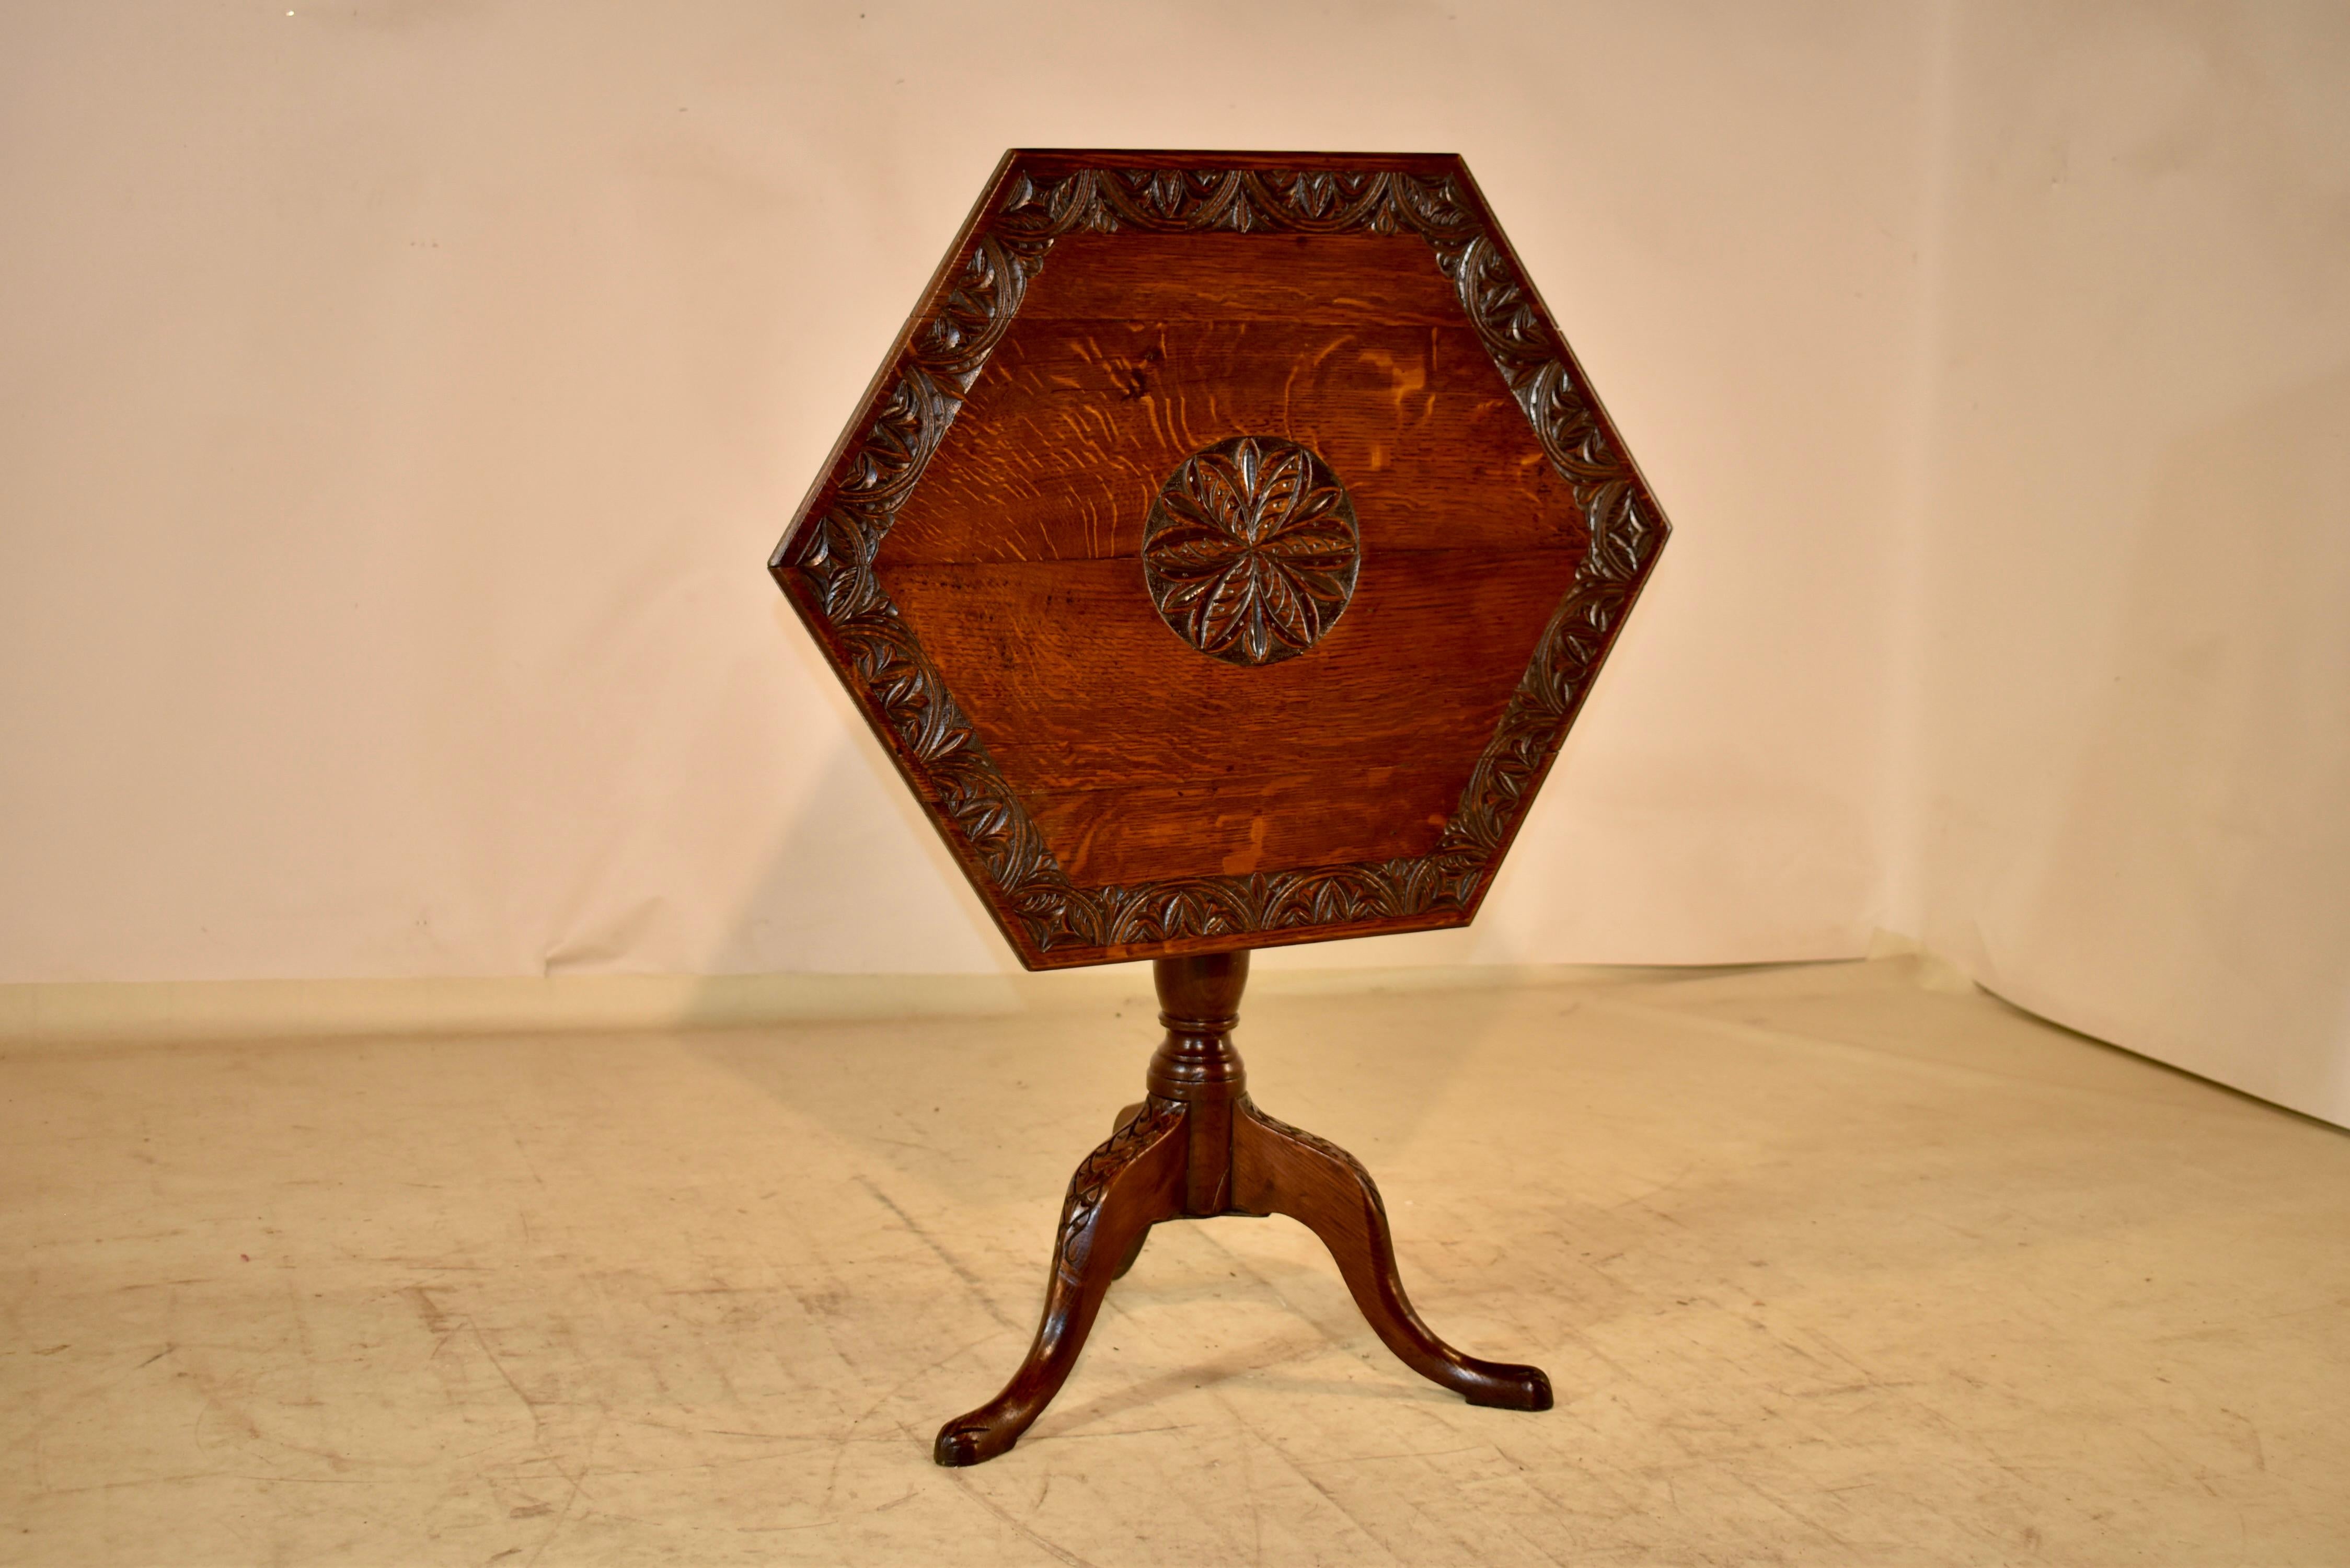 18th century Oak tilt top side table from England. The top has a central carved medallion, surrounded by a carved banded border. The top is hexagonal in shape and tilts for easy storage when having company, or just needing a little extra space when